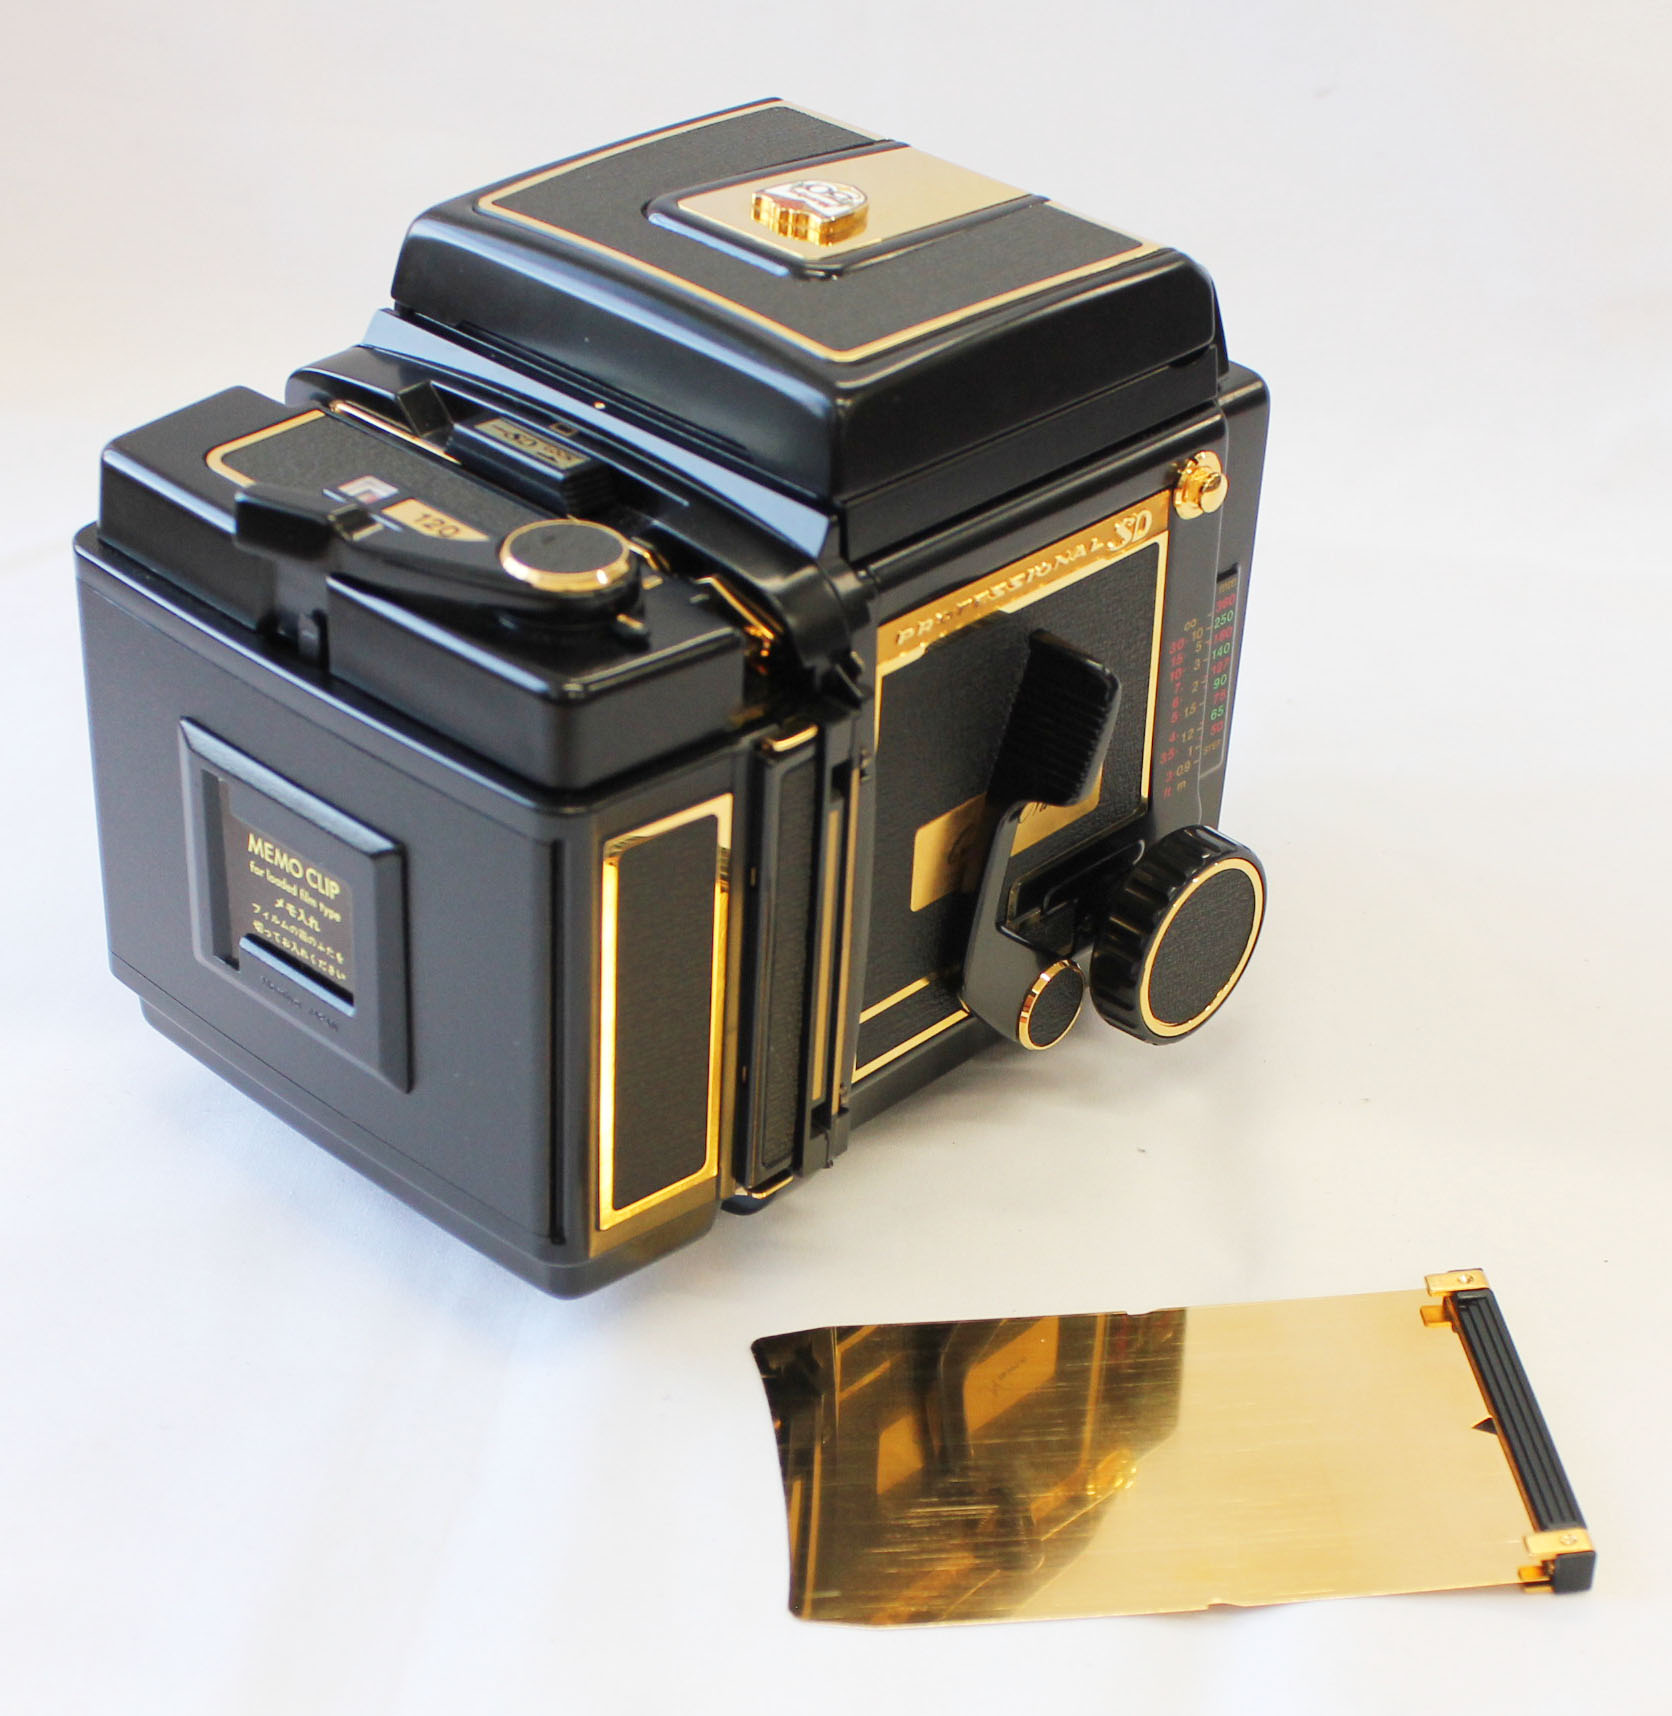 Mamiya RB67 Pro SD Gold K/L 127mm F/3.5 50 Years Limited Edition of 300 from Japan Photo 17